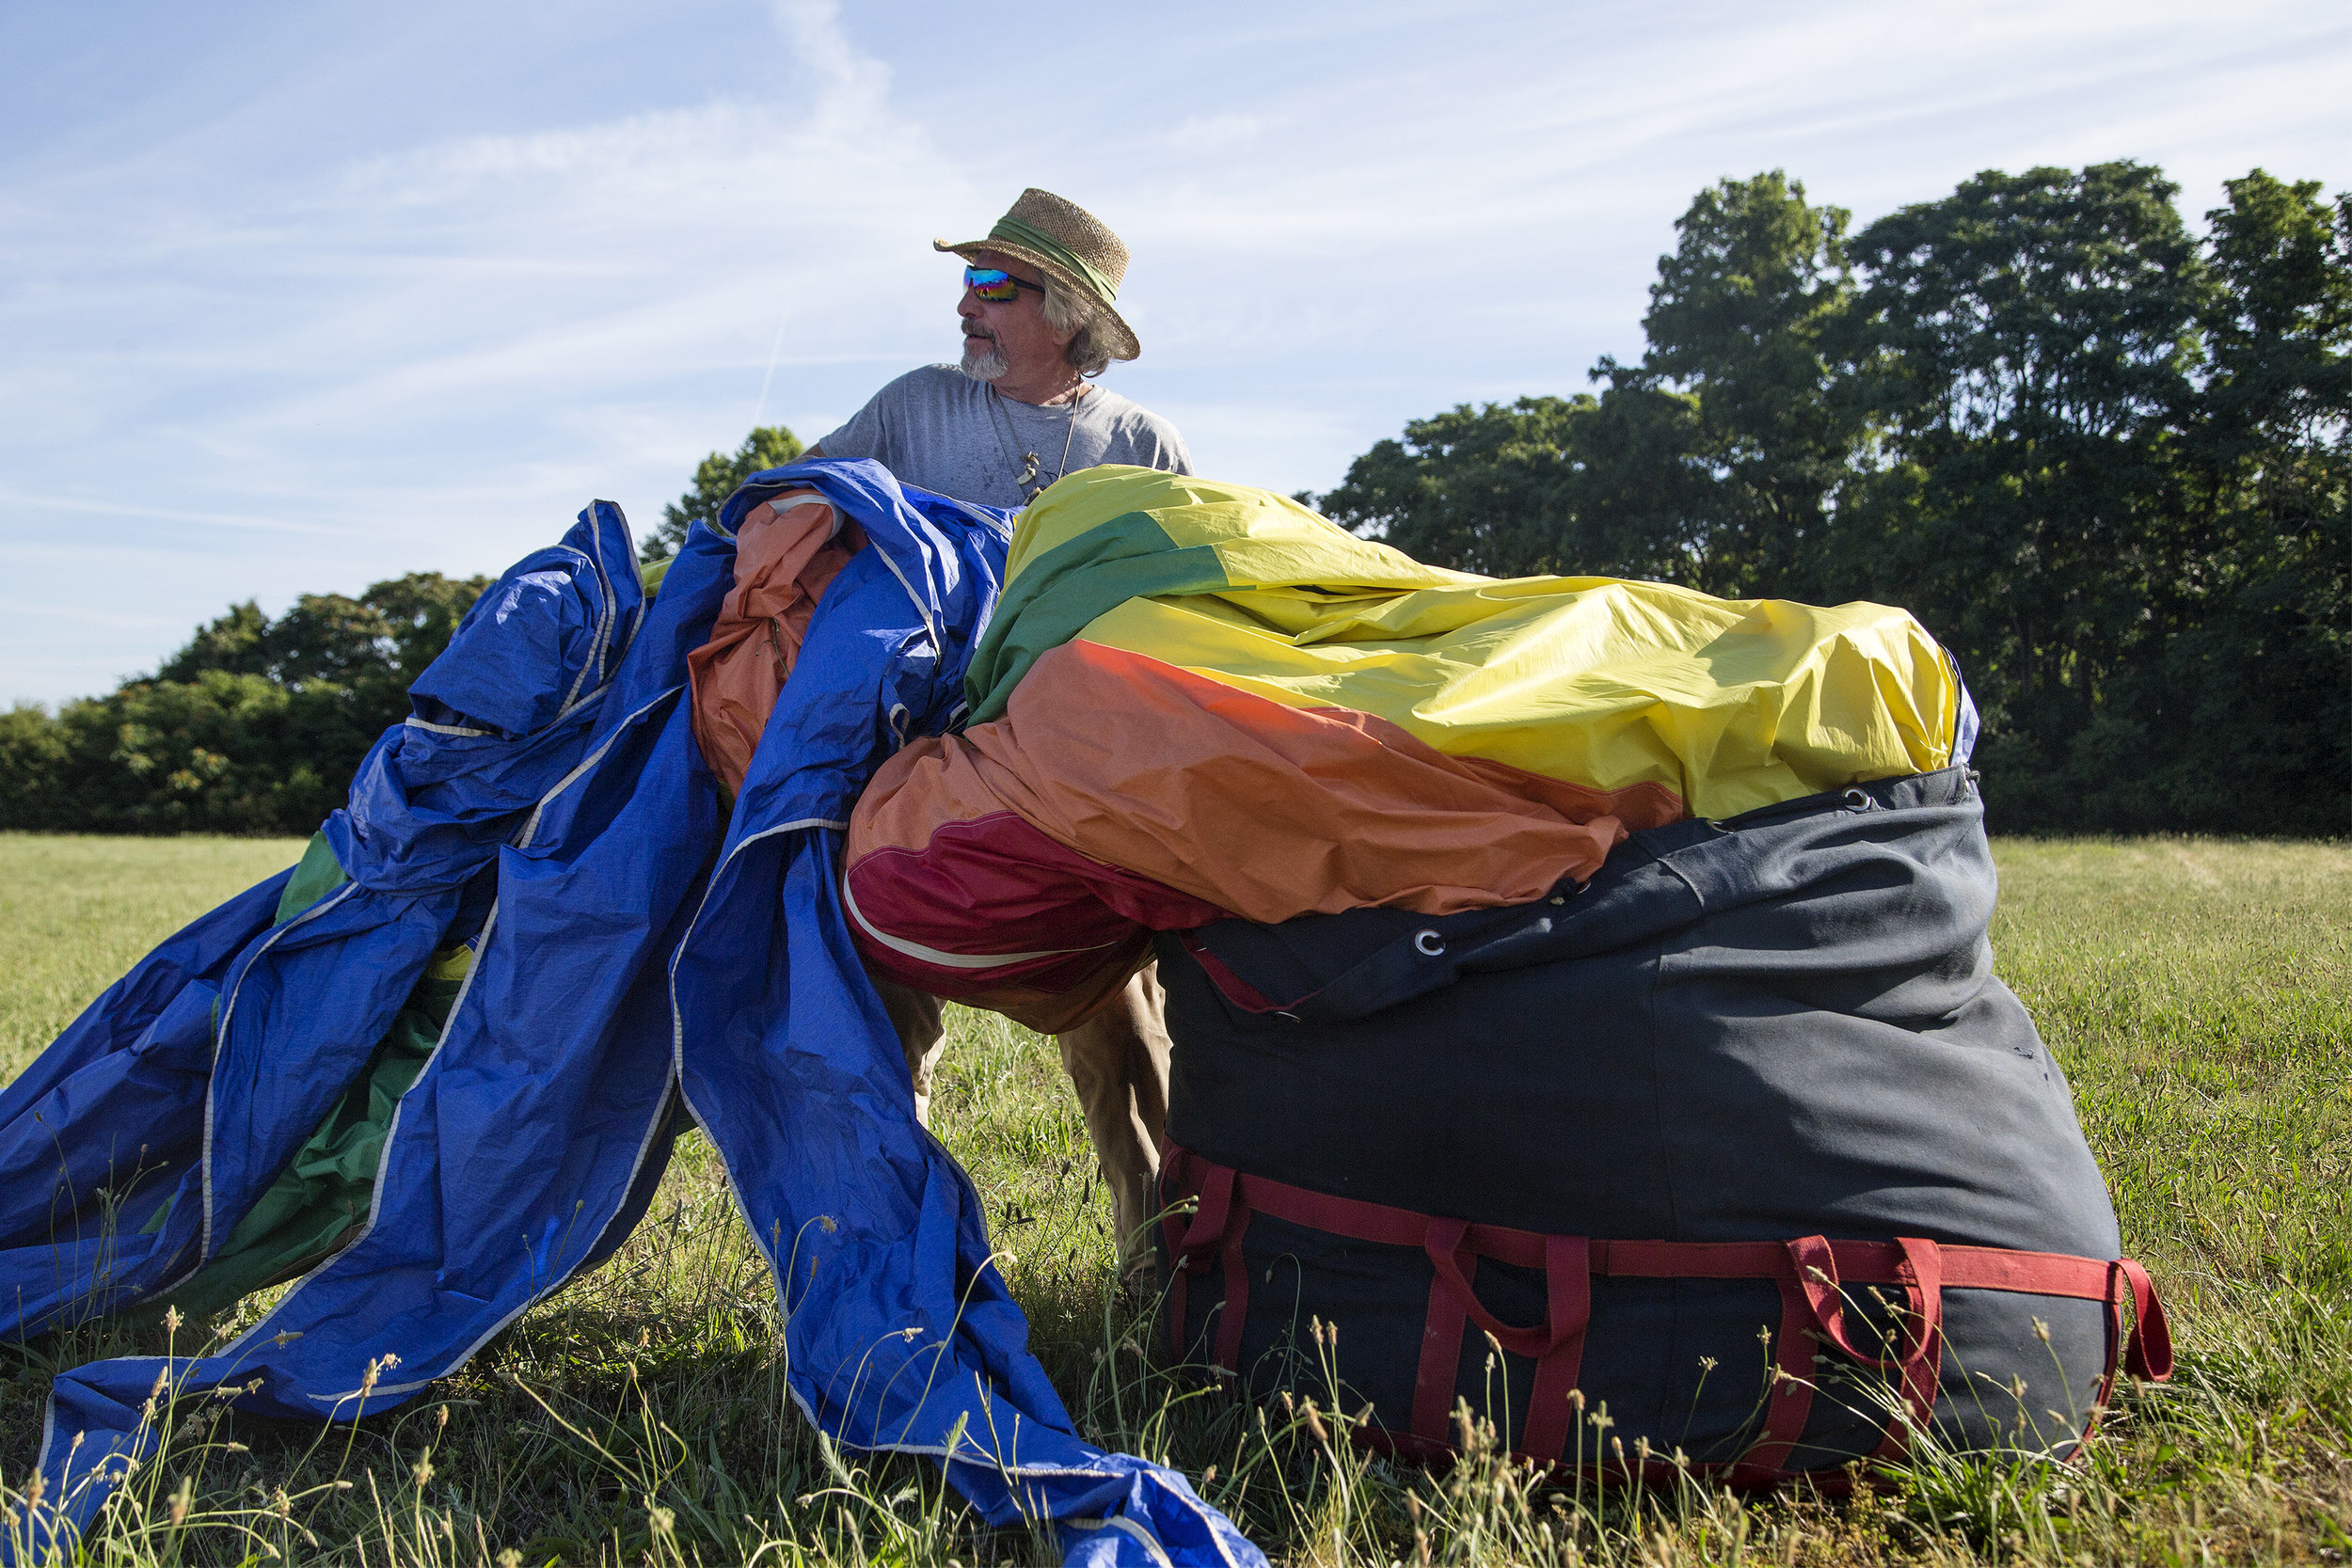  Luke Mason, a ground crew chief for Coastal Balloons, puts the Spectrum hot air balloon into its storage bag after a morning flight over Smithfield on June 4, 2019. 